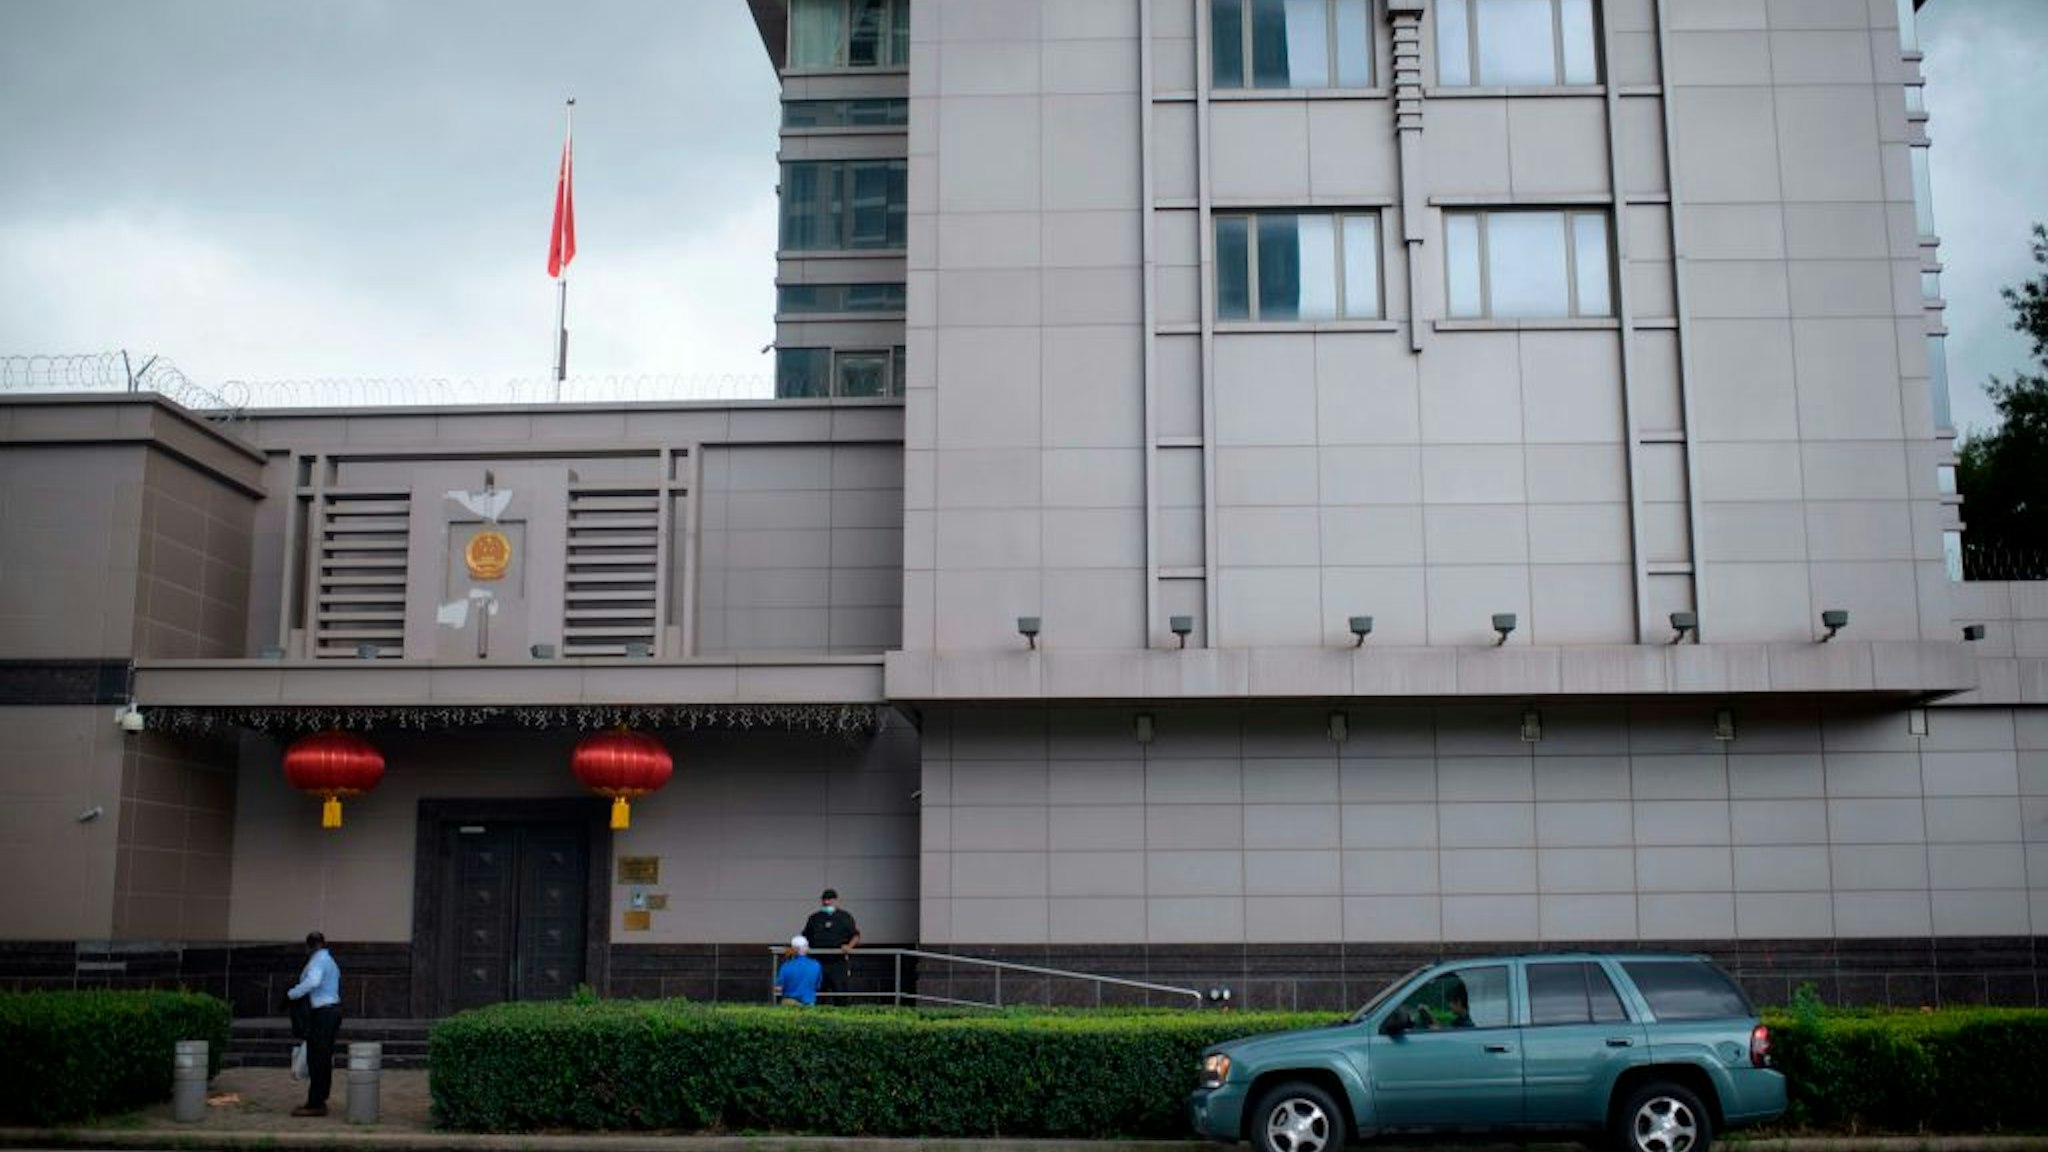 The Chinese flag flies outside of the Chinese consulate in Houston after the US State Department ordered China to close the consulate in Houston, Texas, July 22, 2020